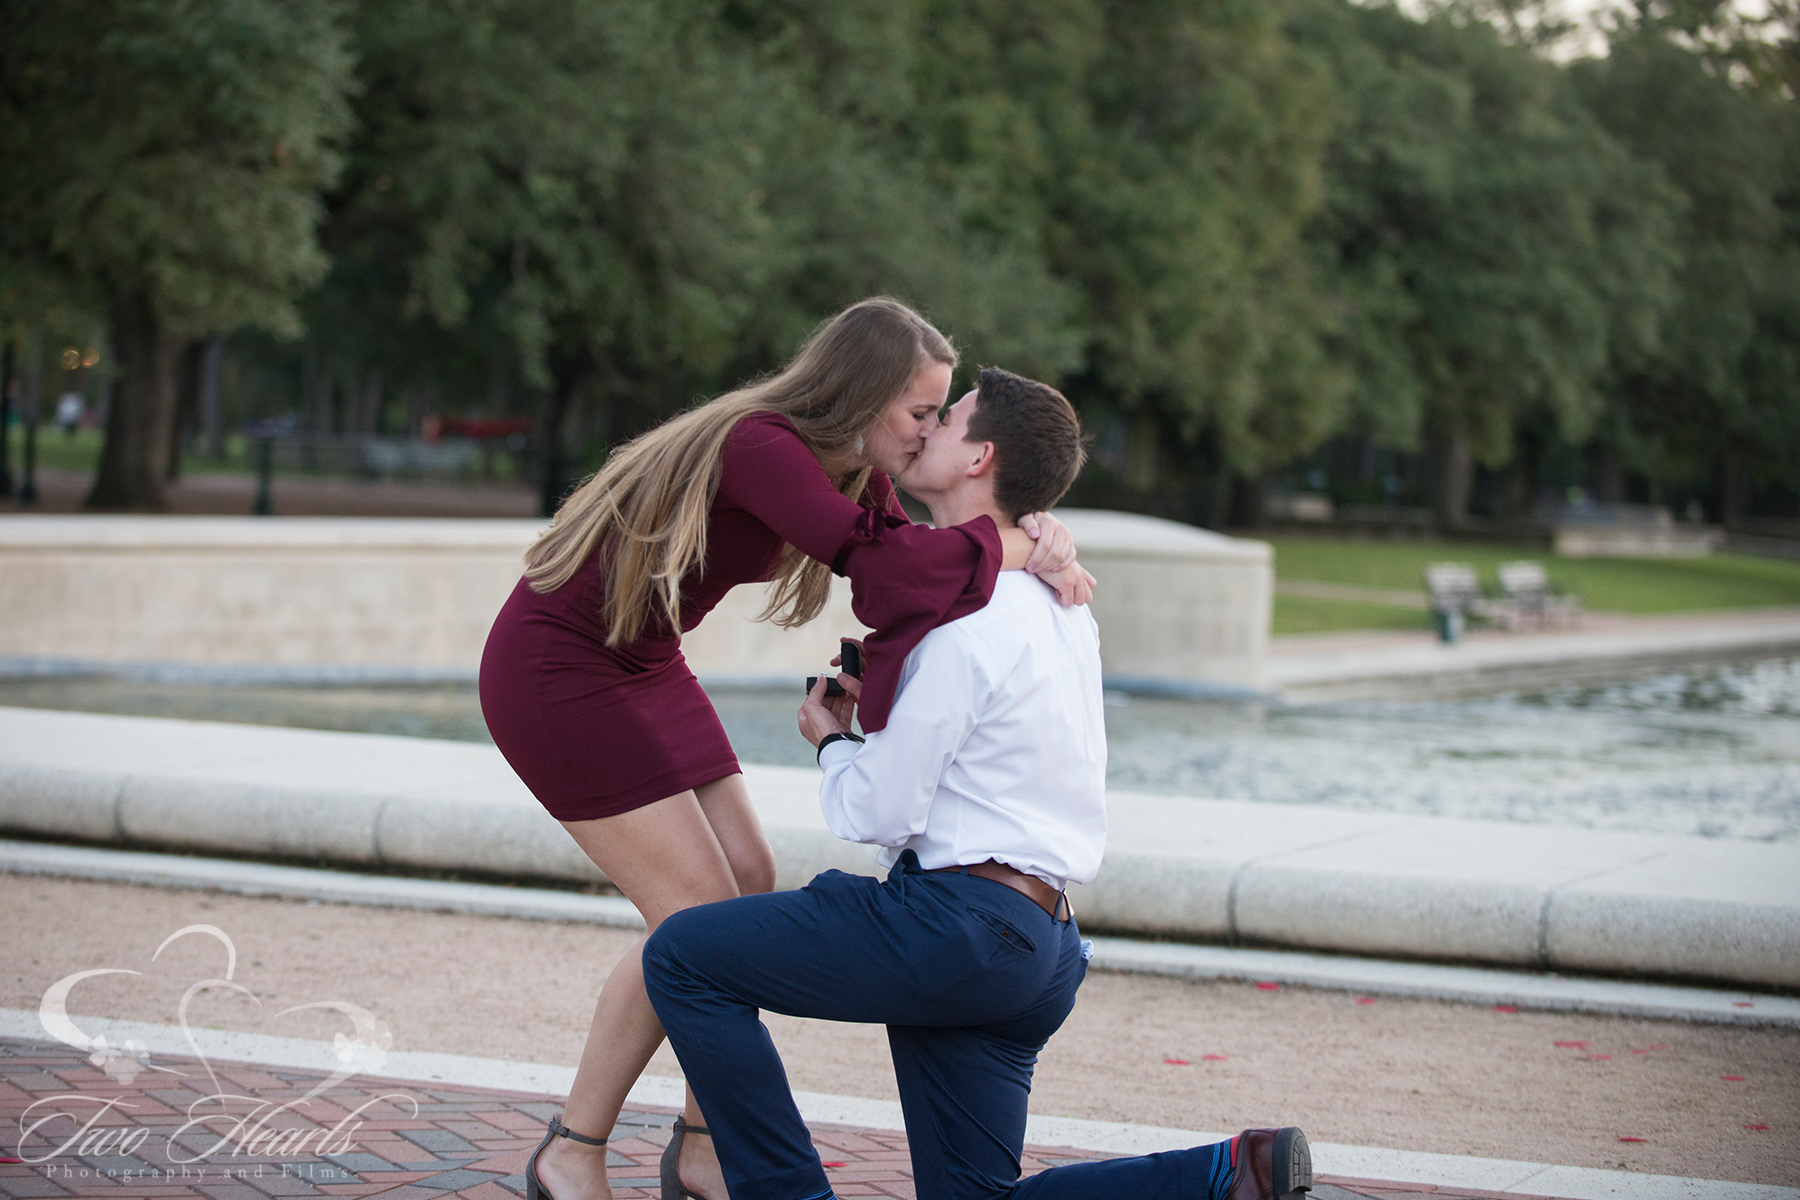 Working With Your Hermann Park Proposal Photographer